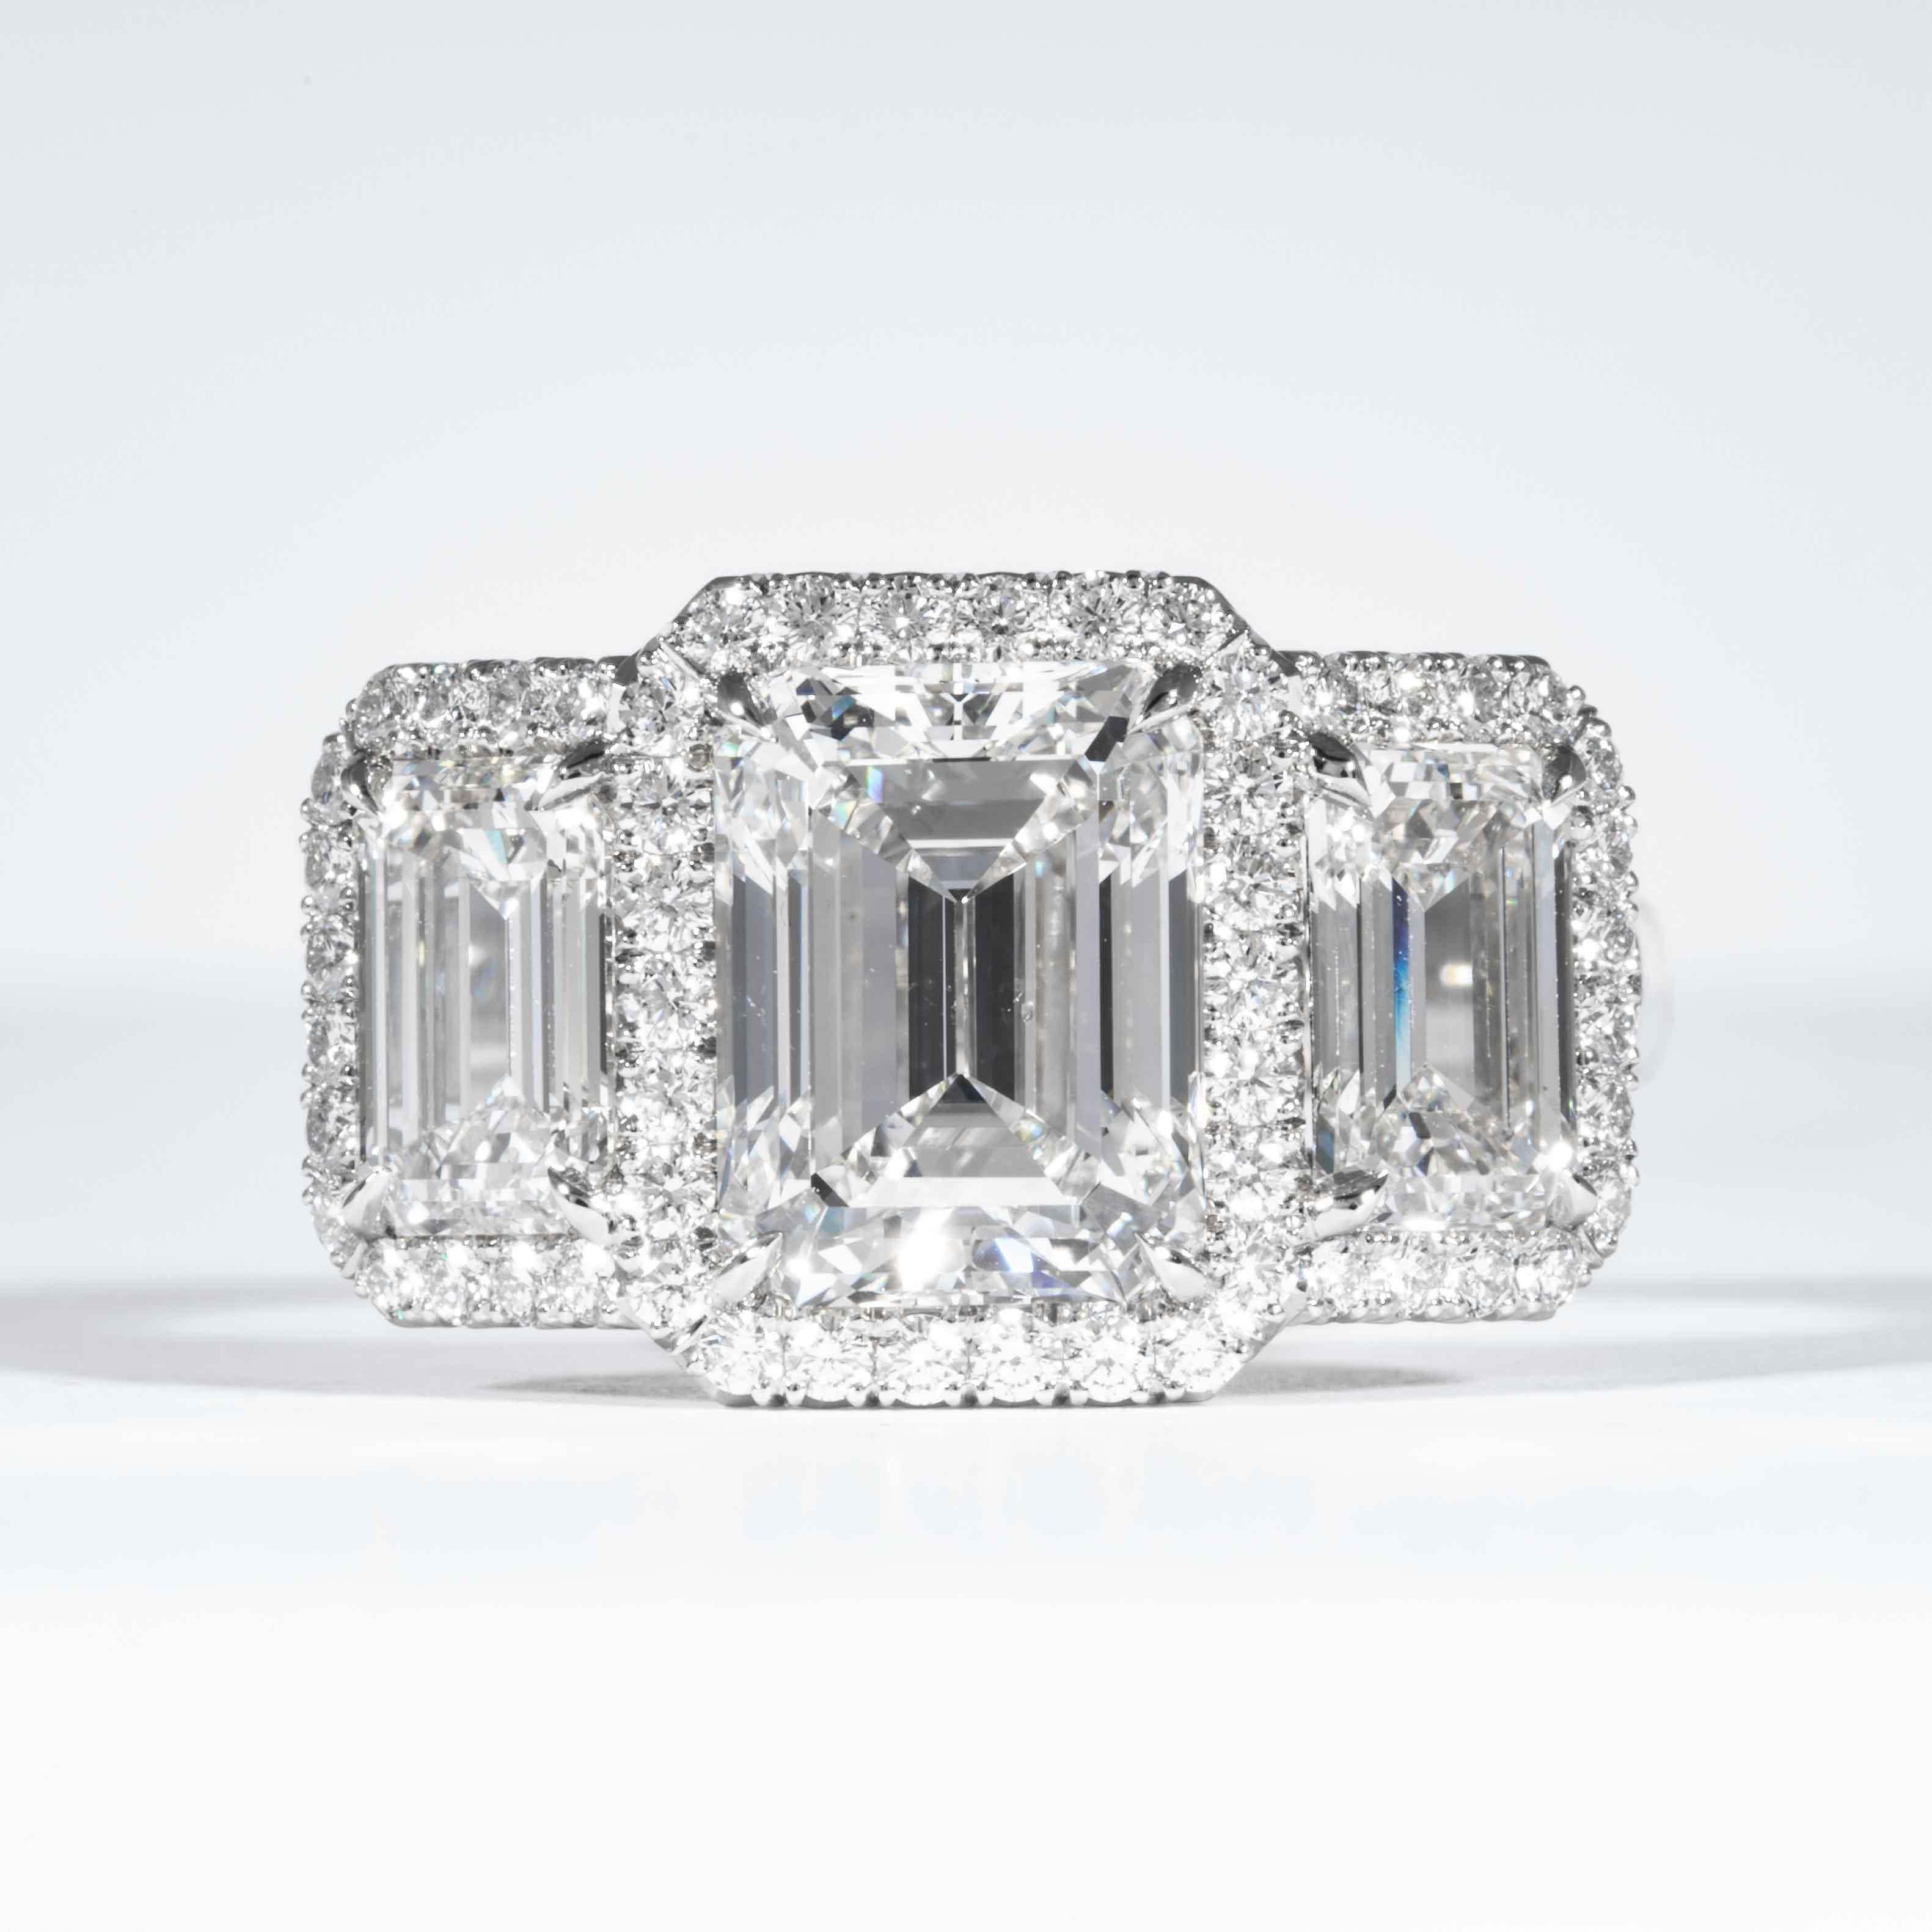 This 3-Stone diamond ring is offered by Shreve, Crump & Low. This 3.23 carat GIA Certified G SI1 emerald cut diamond measuring 9.52 x 7.28 x 5.05 mm is custom set in a handcrafted Shreve, Crump & Low platinum 3-stone ring. The 3.23 carat emerald cut